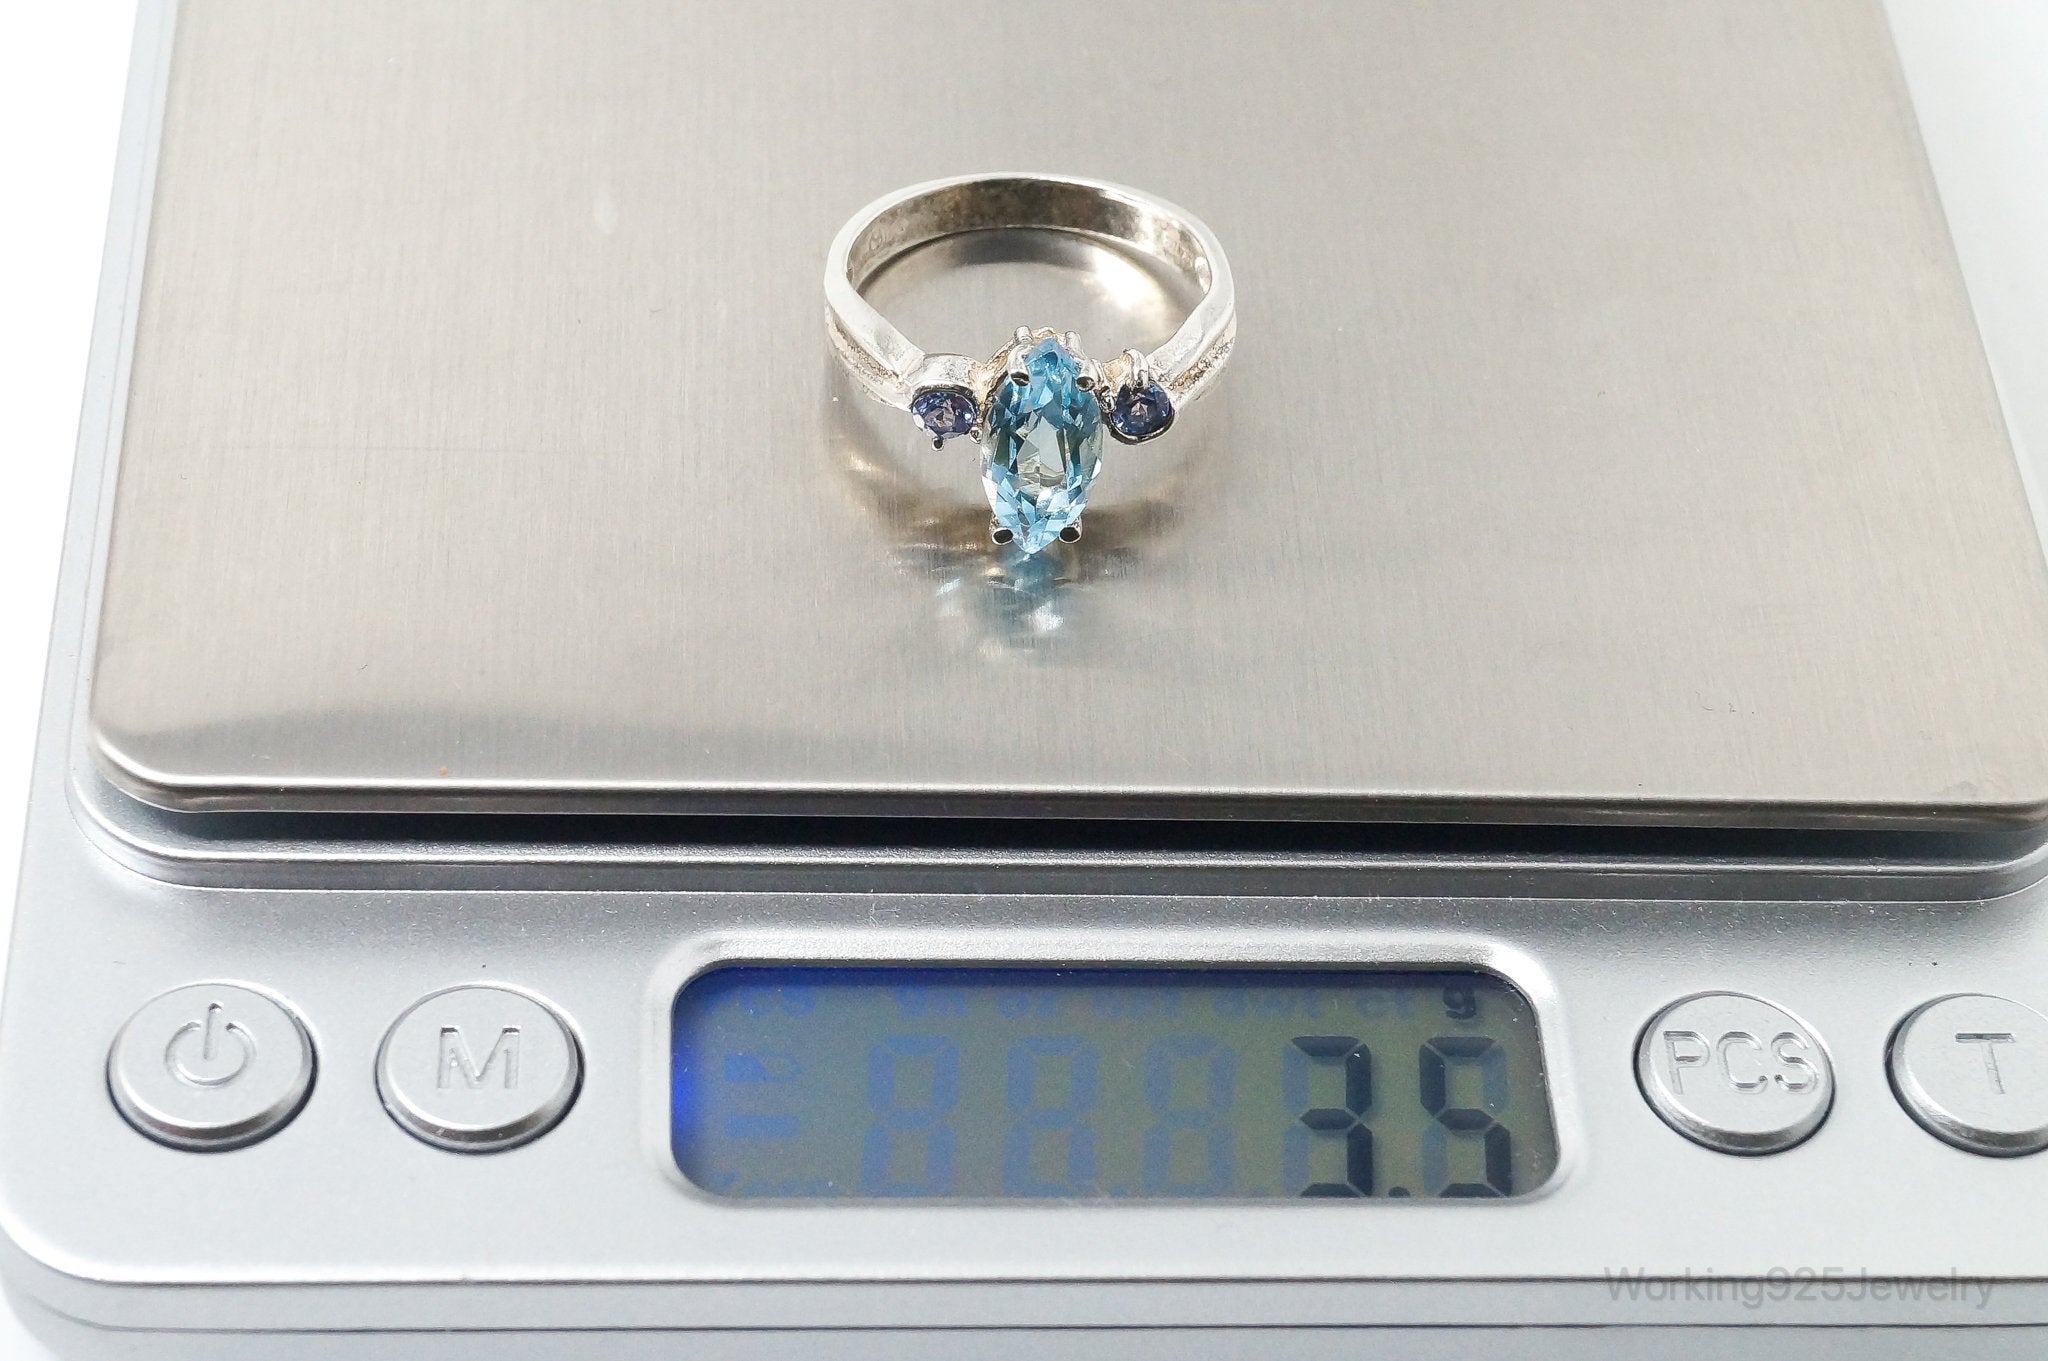 Vintage Blue Topaz Blue Cubic Zirconia Sterling Silver Ring - Size 8.5